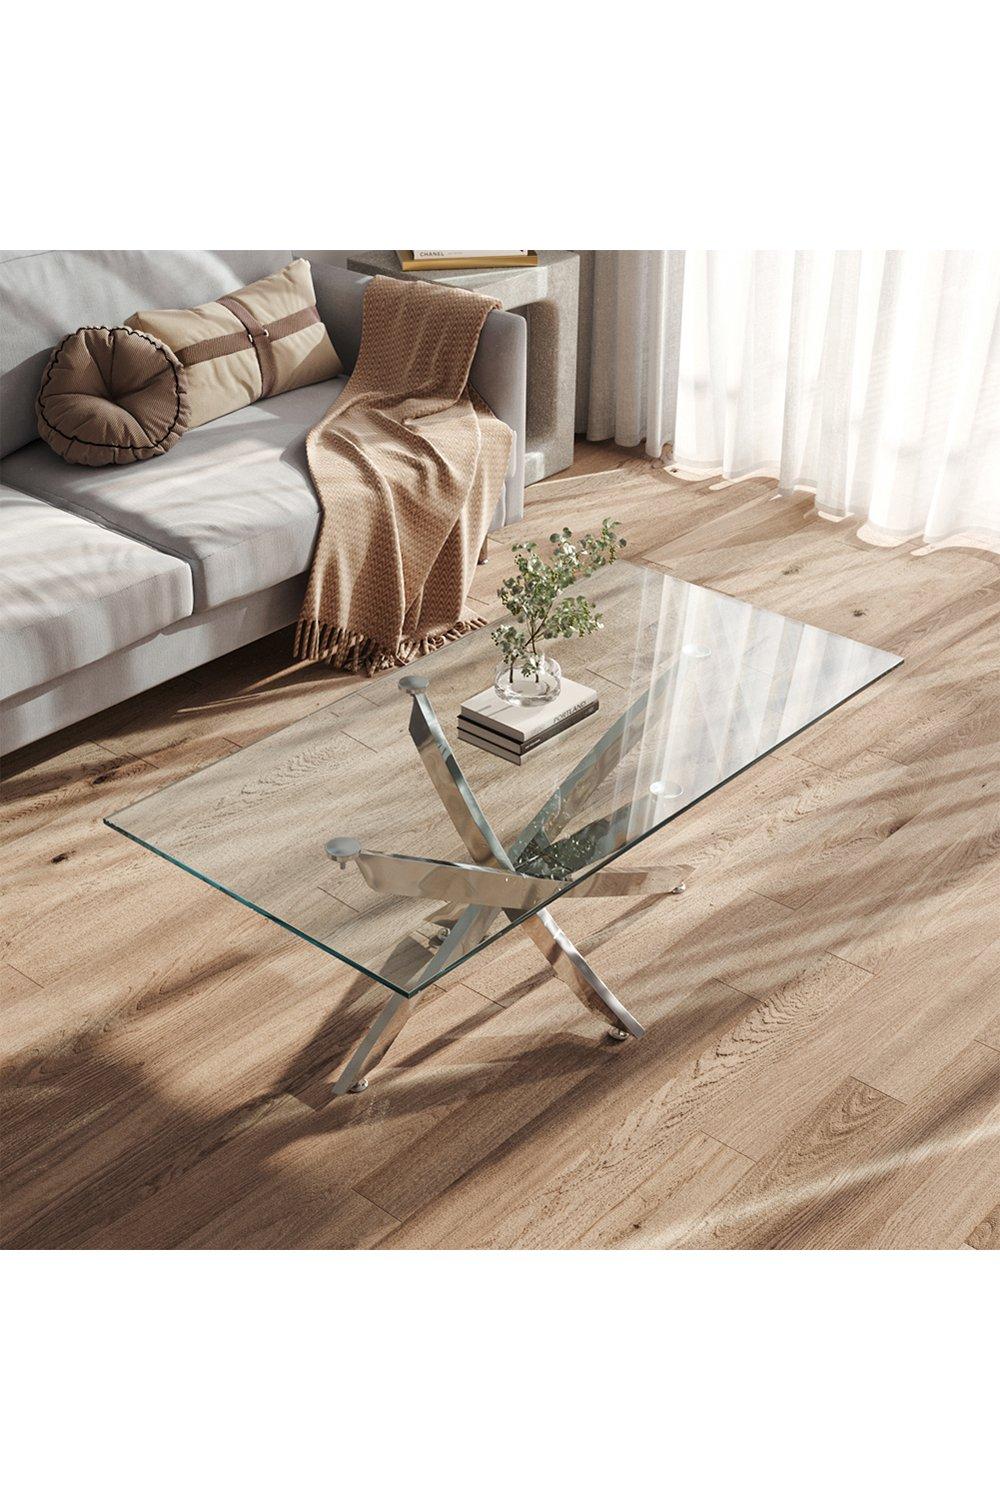 120 cm W x 60 cm D Rectangle Clear Tempered Glass Top Coffee Table with Chrome Legs